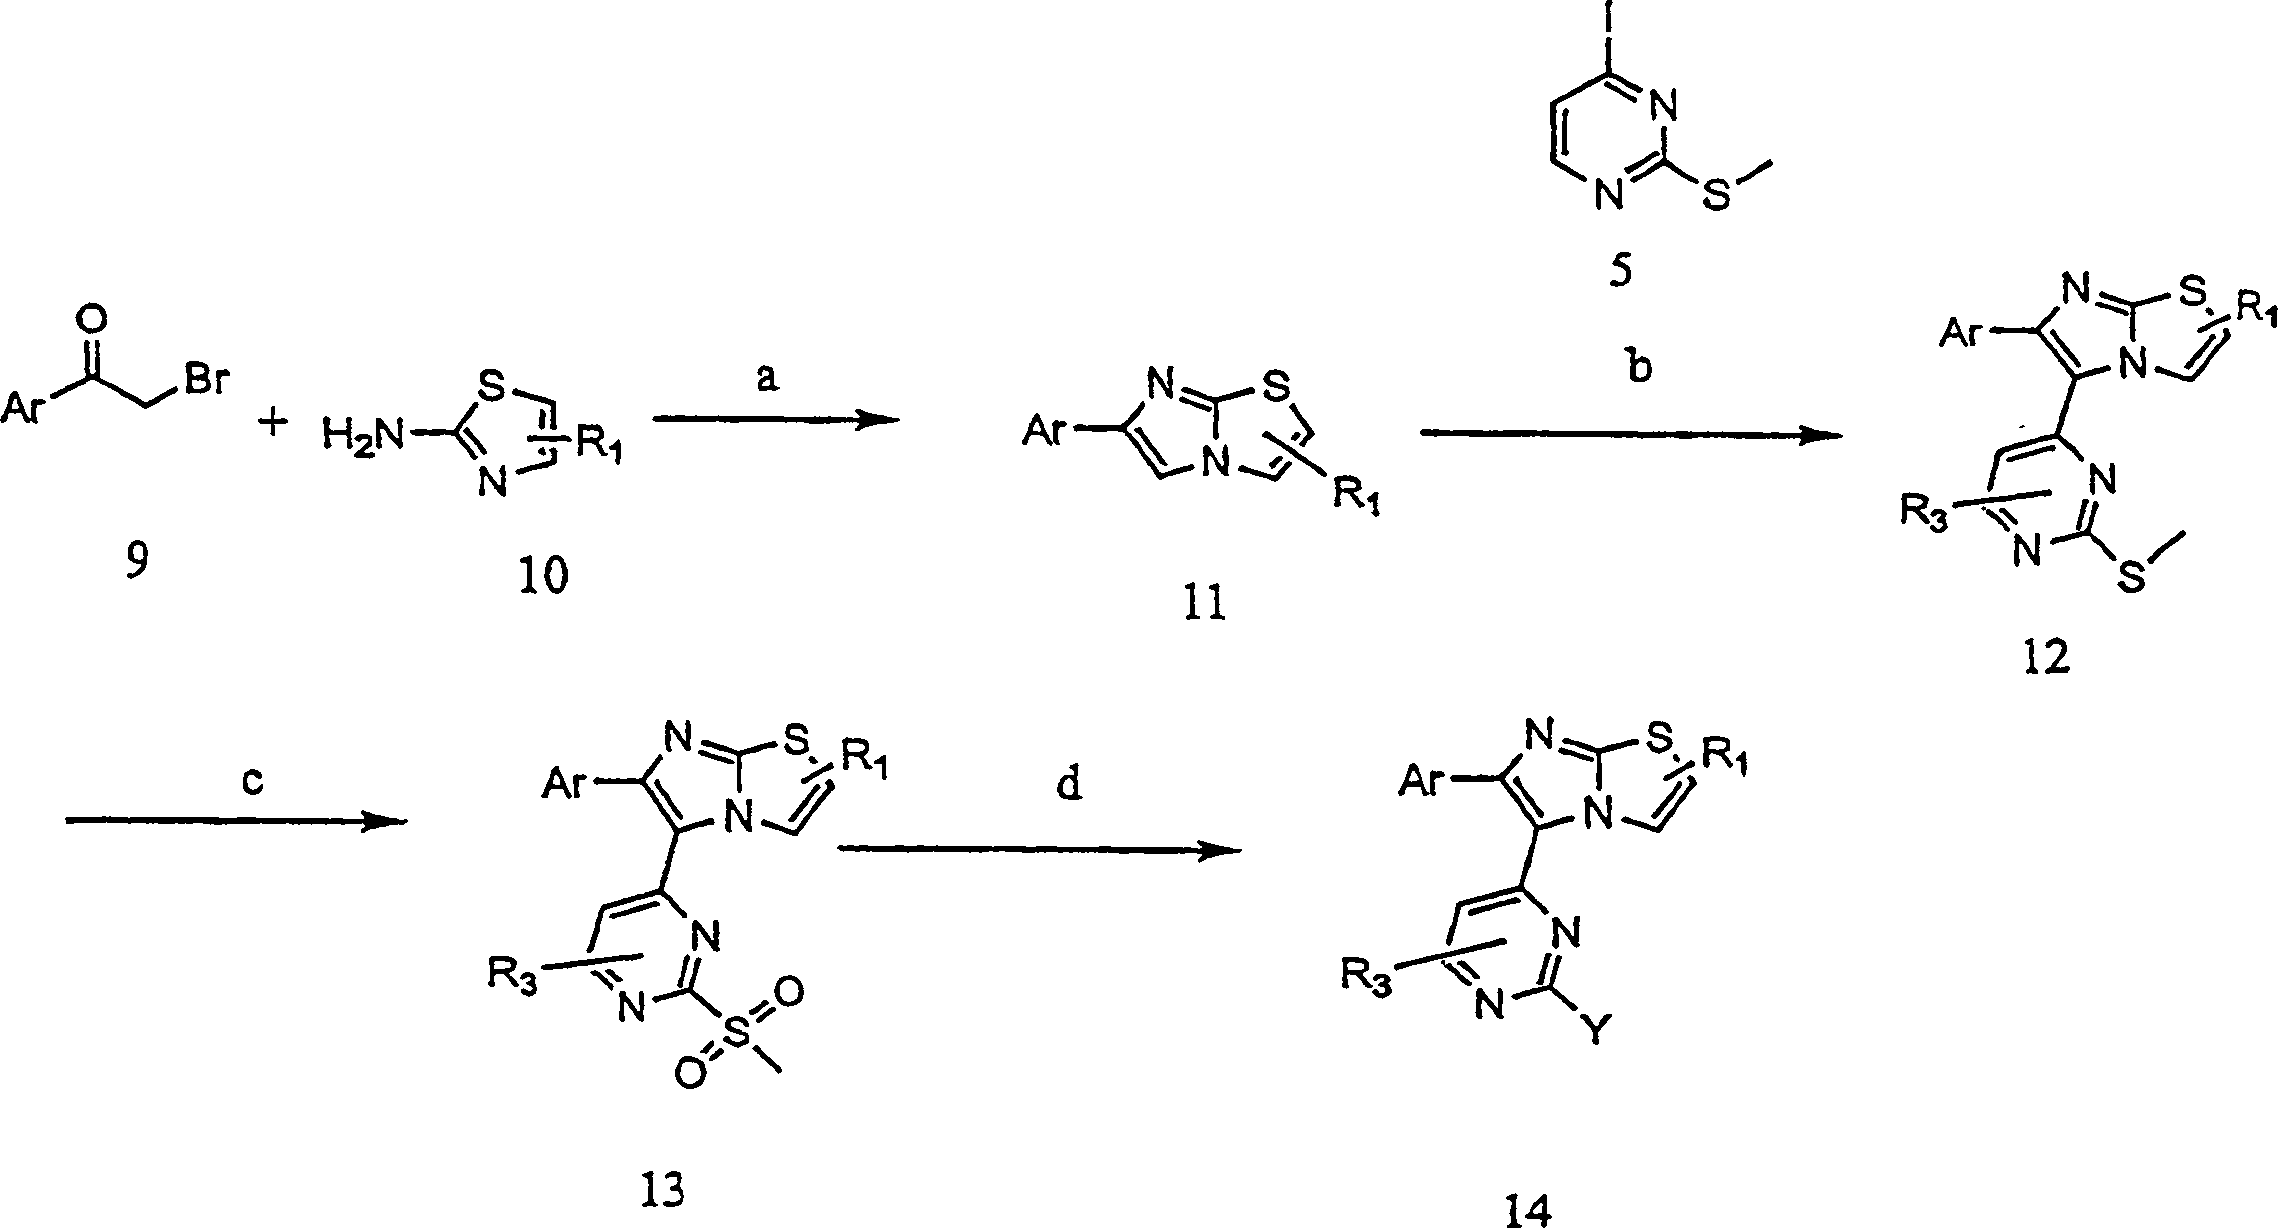 Inhibitors of P38 and methods of using the same